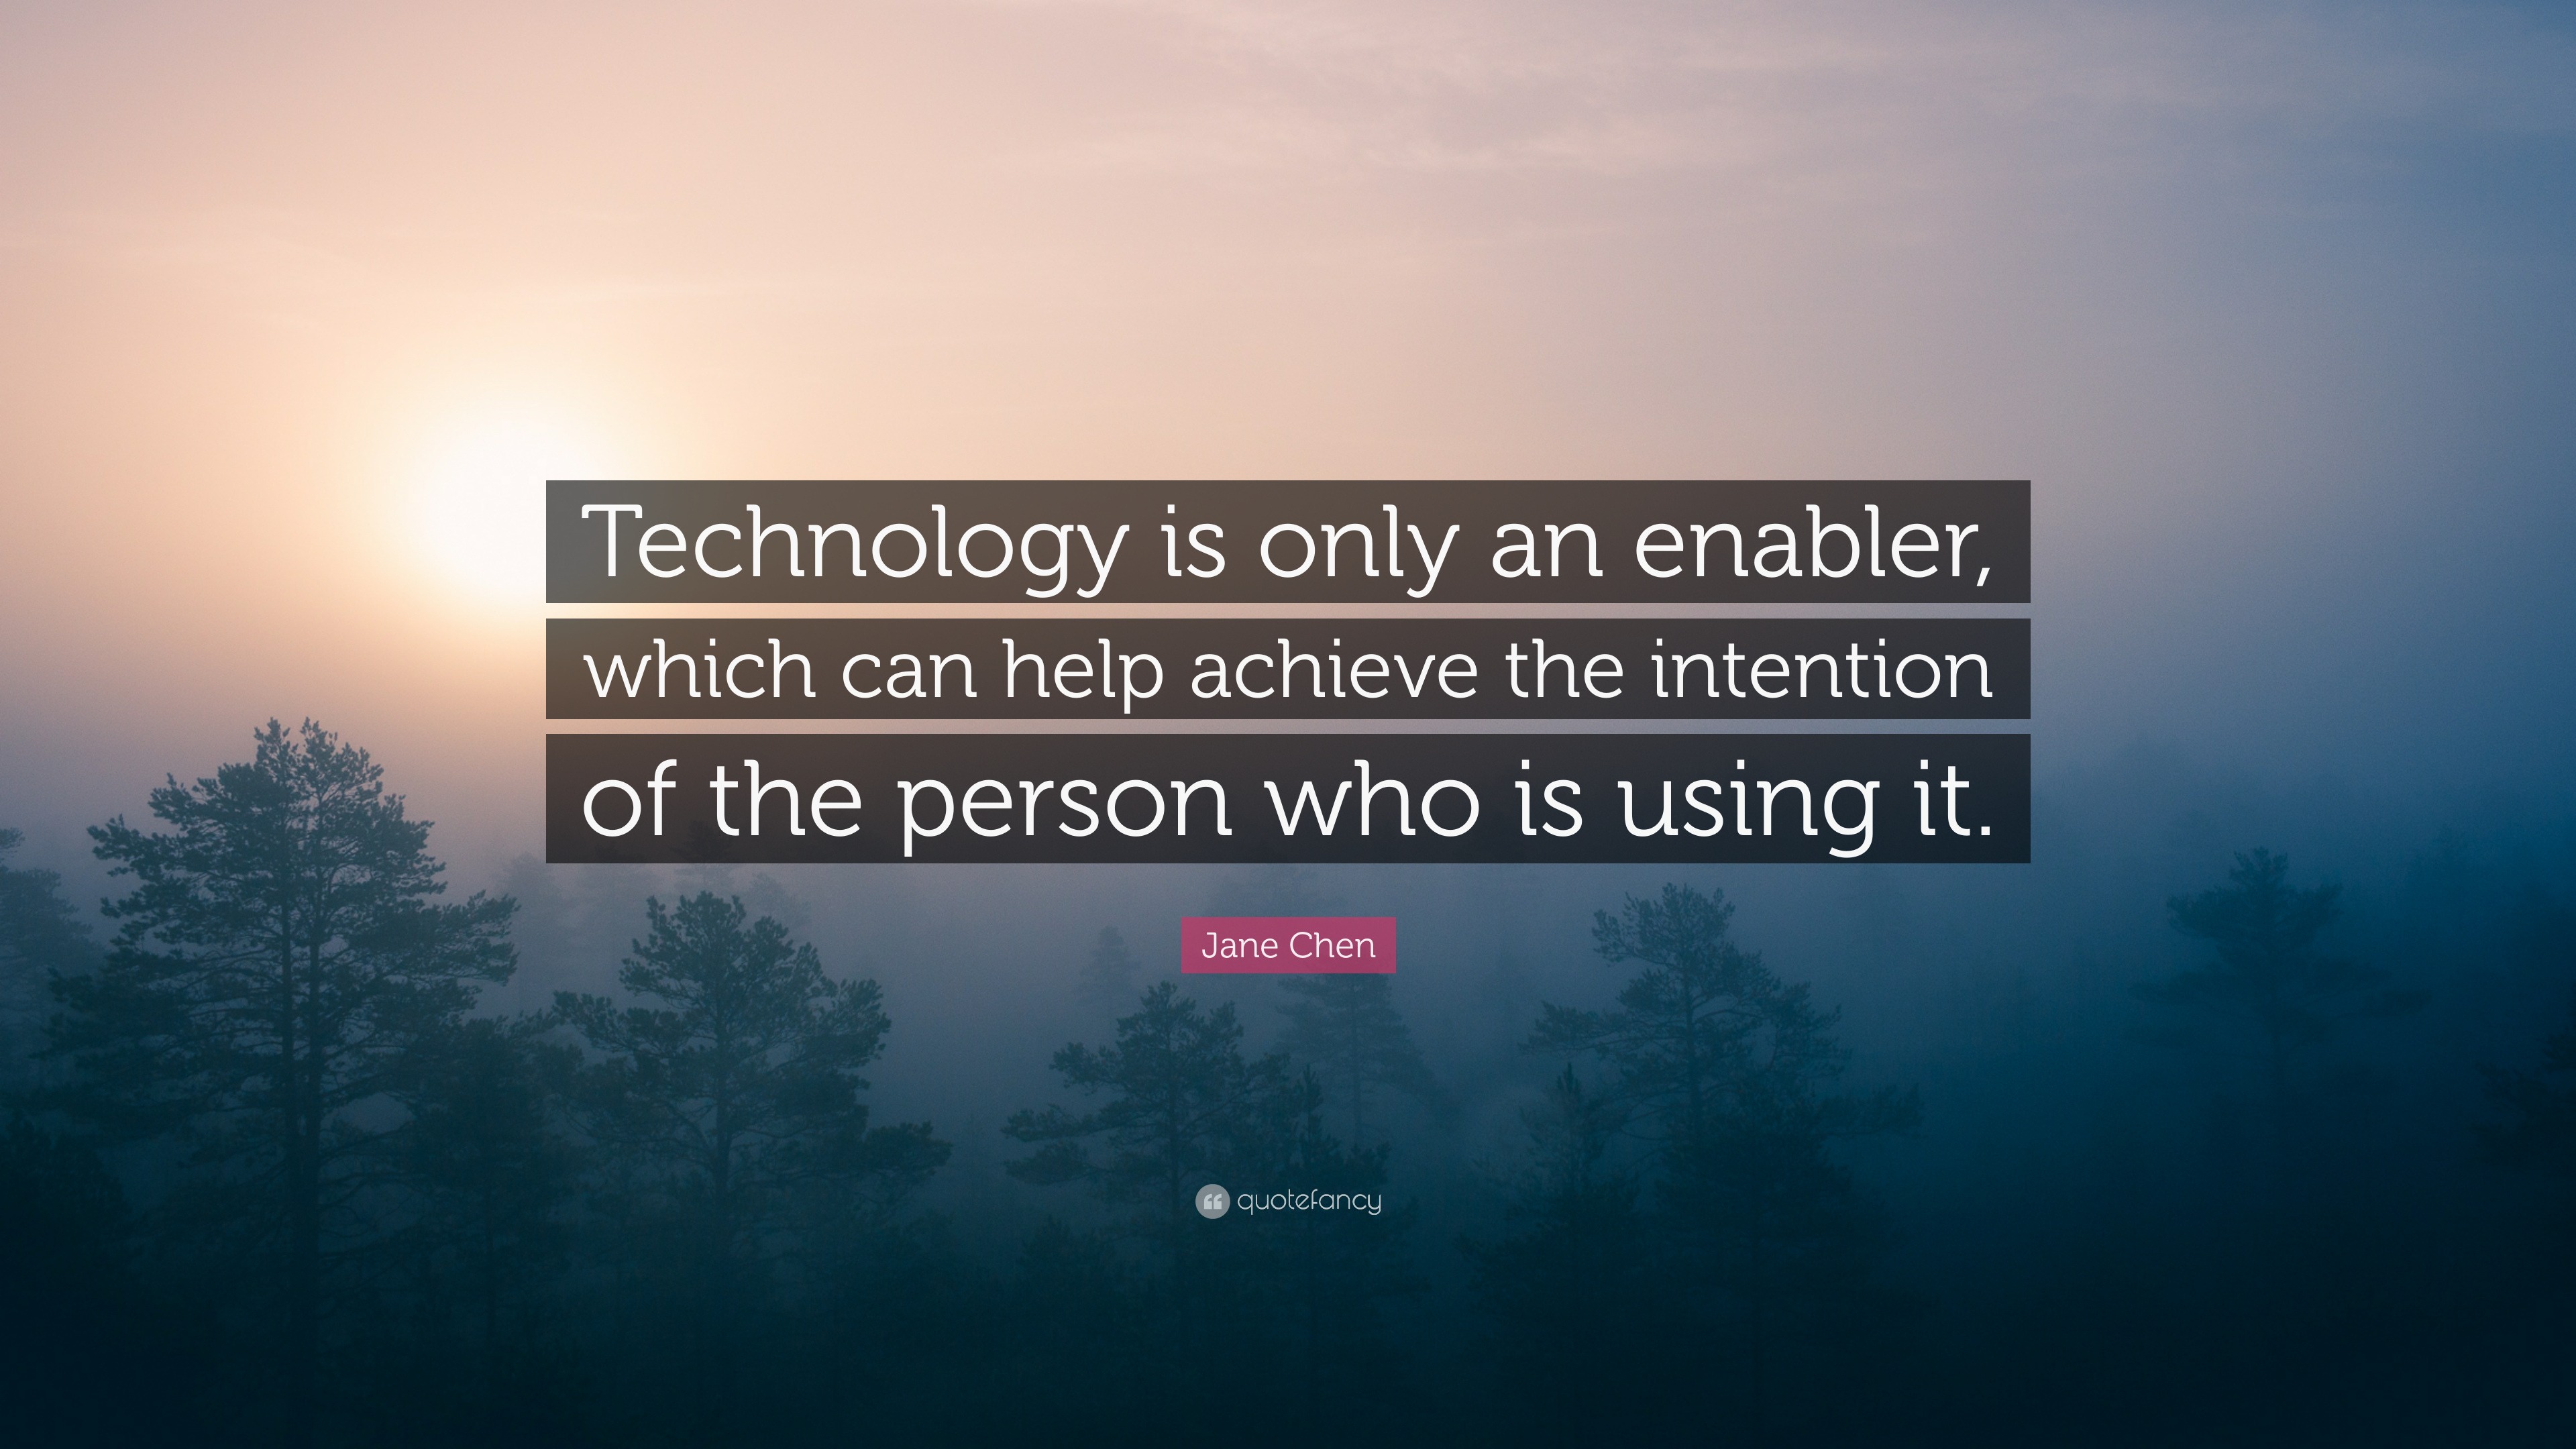 Jane Chen Quote: “Technology is only an enabler, which can help achieve ...